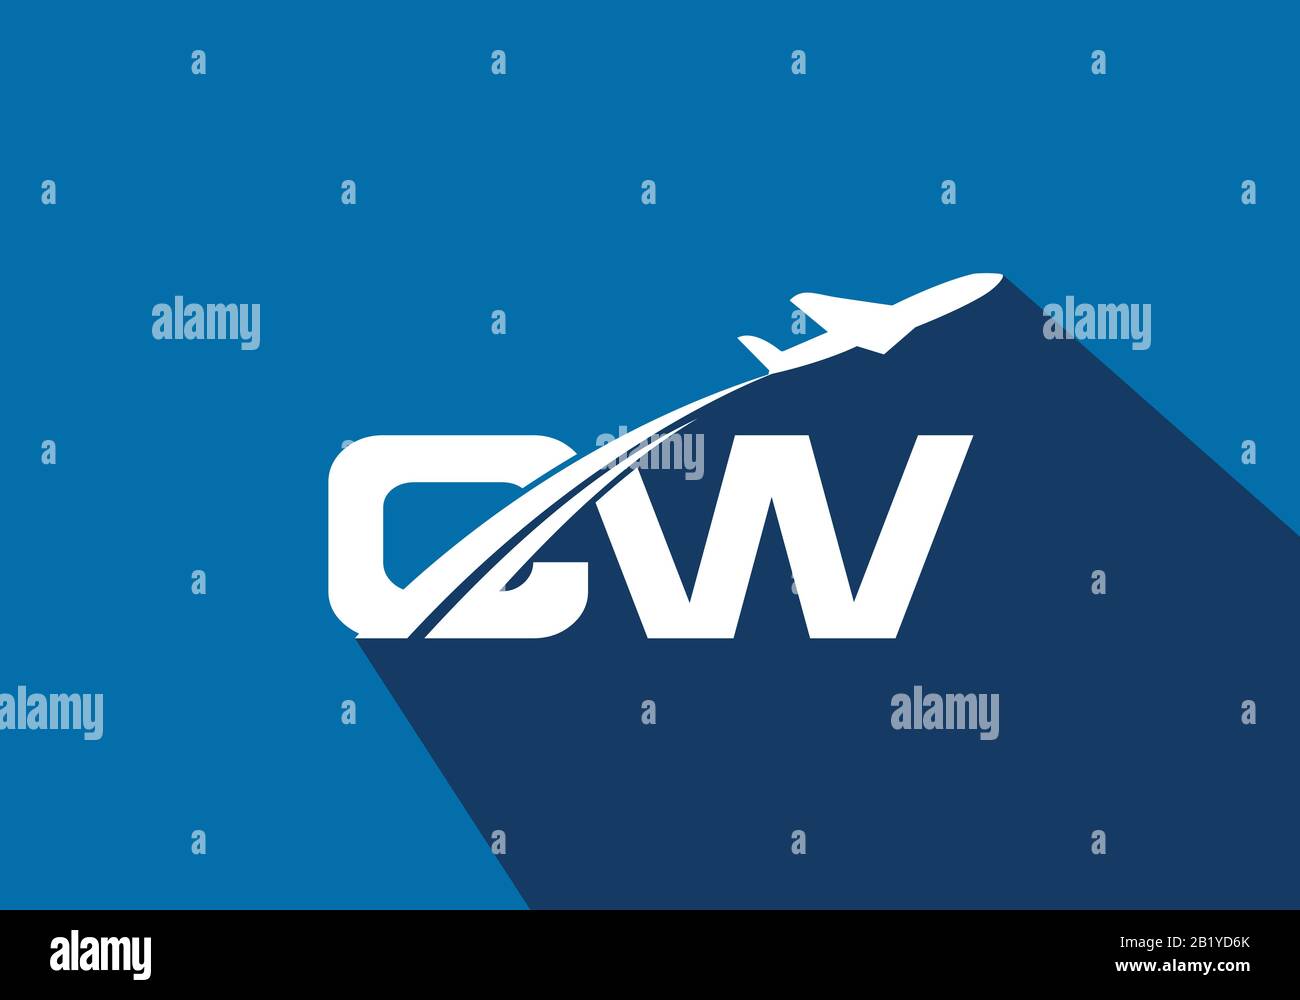 Initial Letter C and W  with Aviation Logo Design, Air, Airline, Airplane and Travel Logo template. Stock Vector